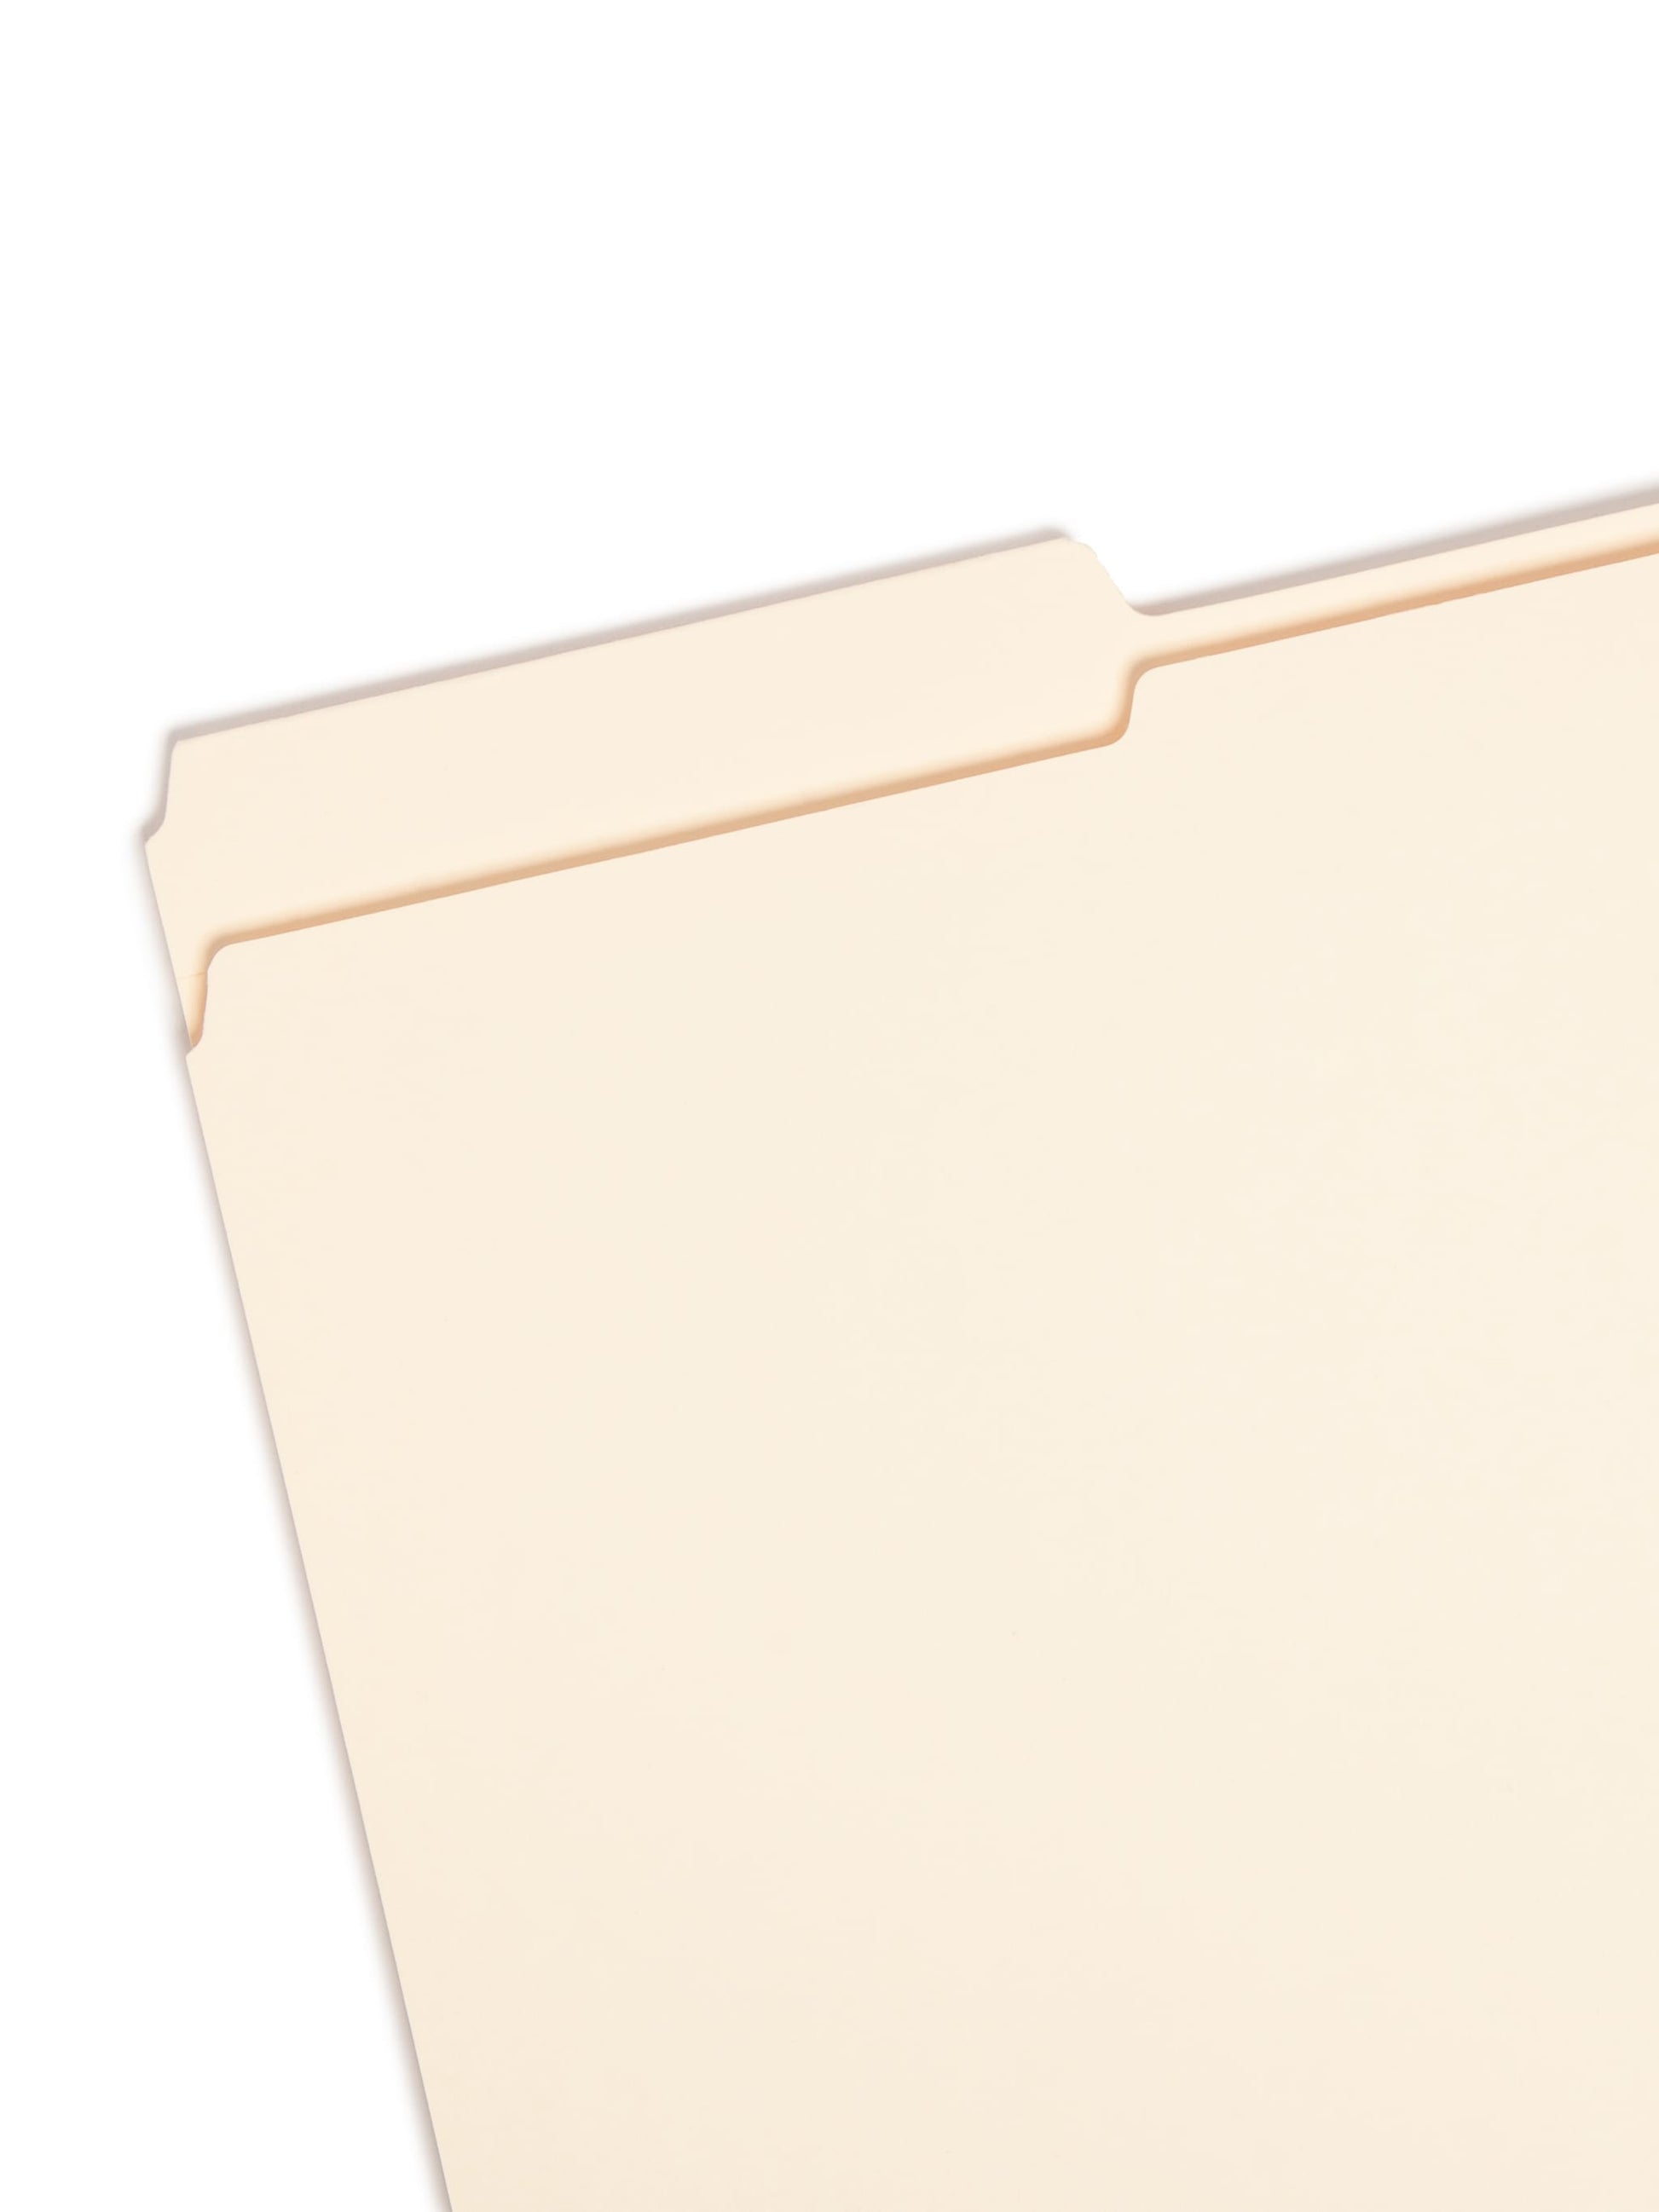 Reinforced Tab File Folders, 1.5 inch Expansion, 1/3-Cut Tab, Manila Color, Legal Size, Set of 50, 086486154055